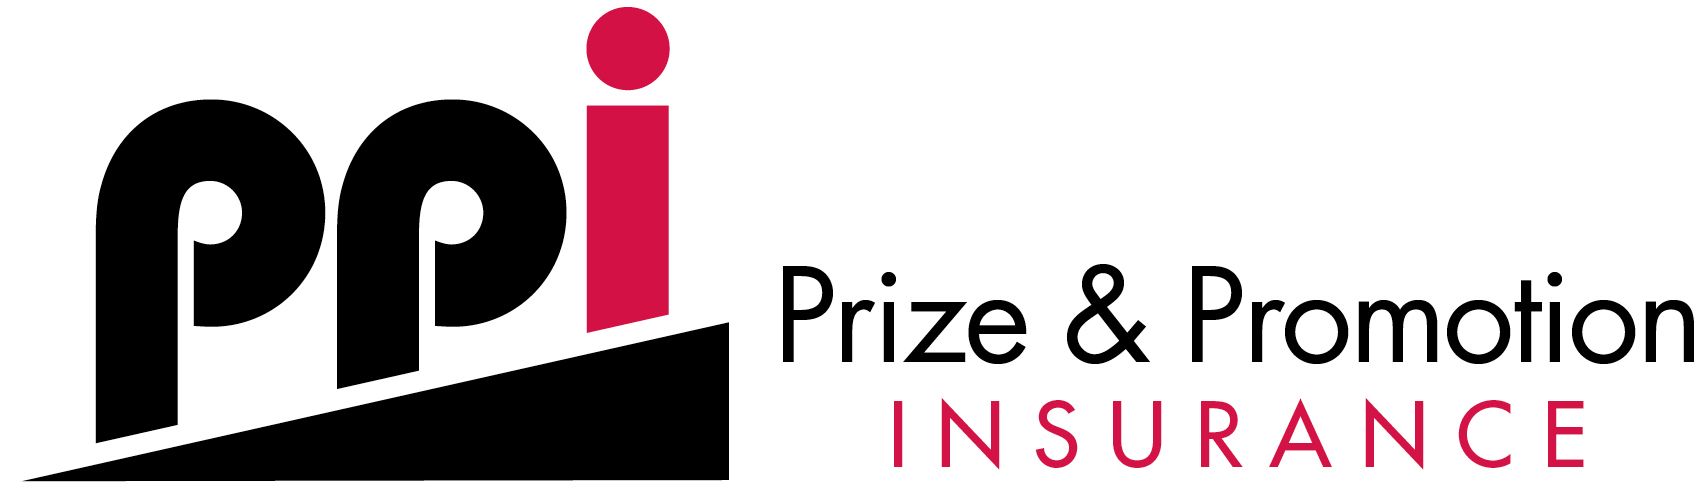 Prize and Promotion Insurance Services